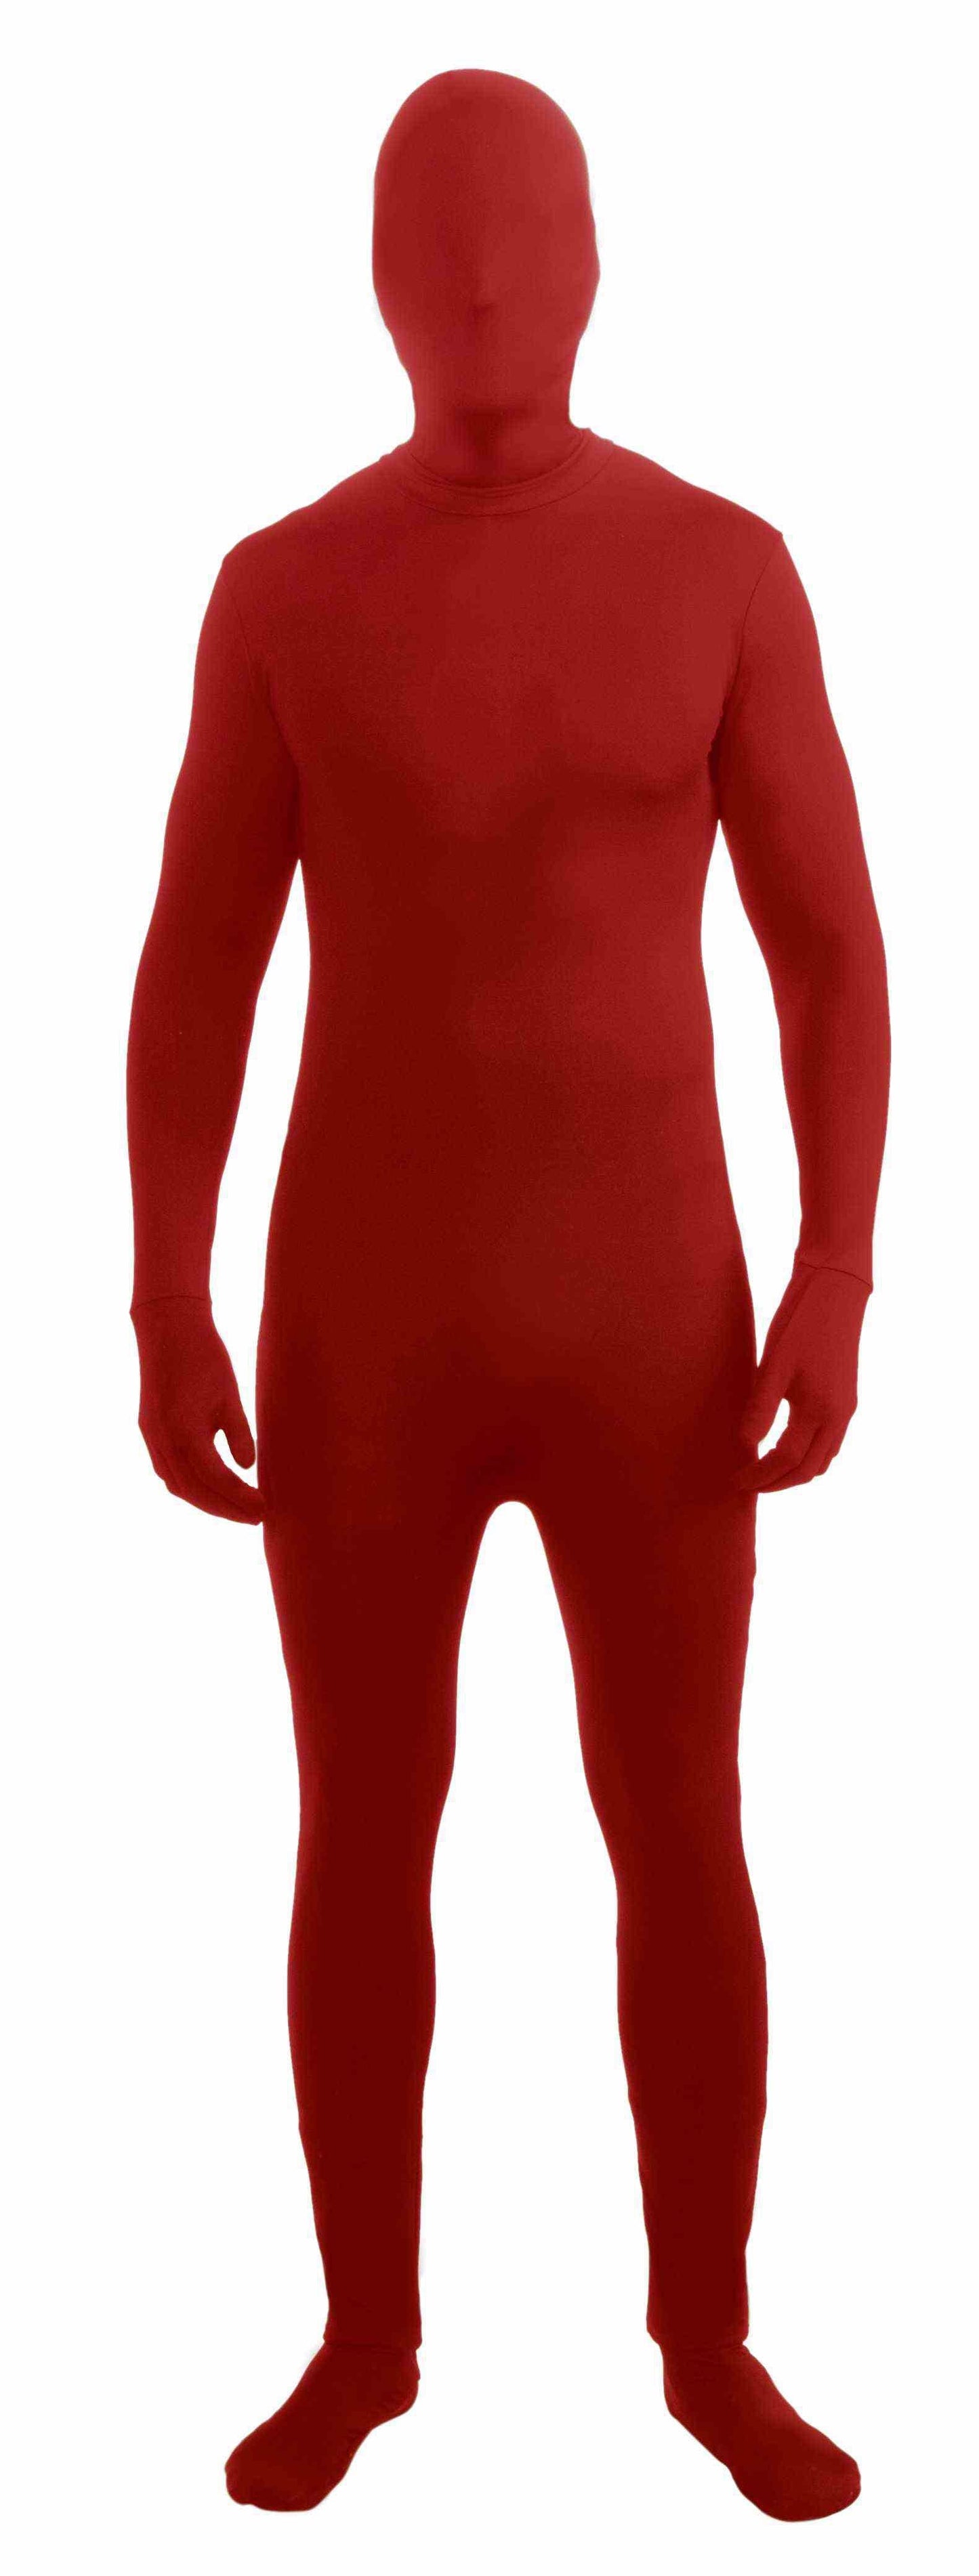 Disappearing Man Red Adult Costume